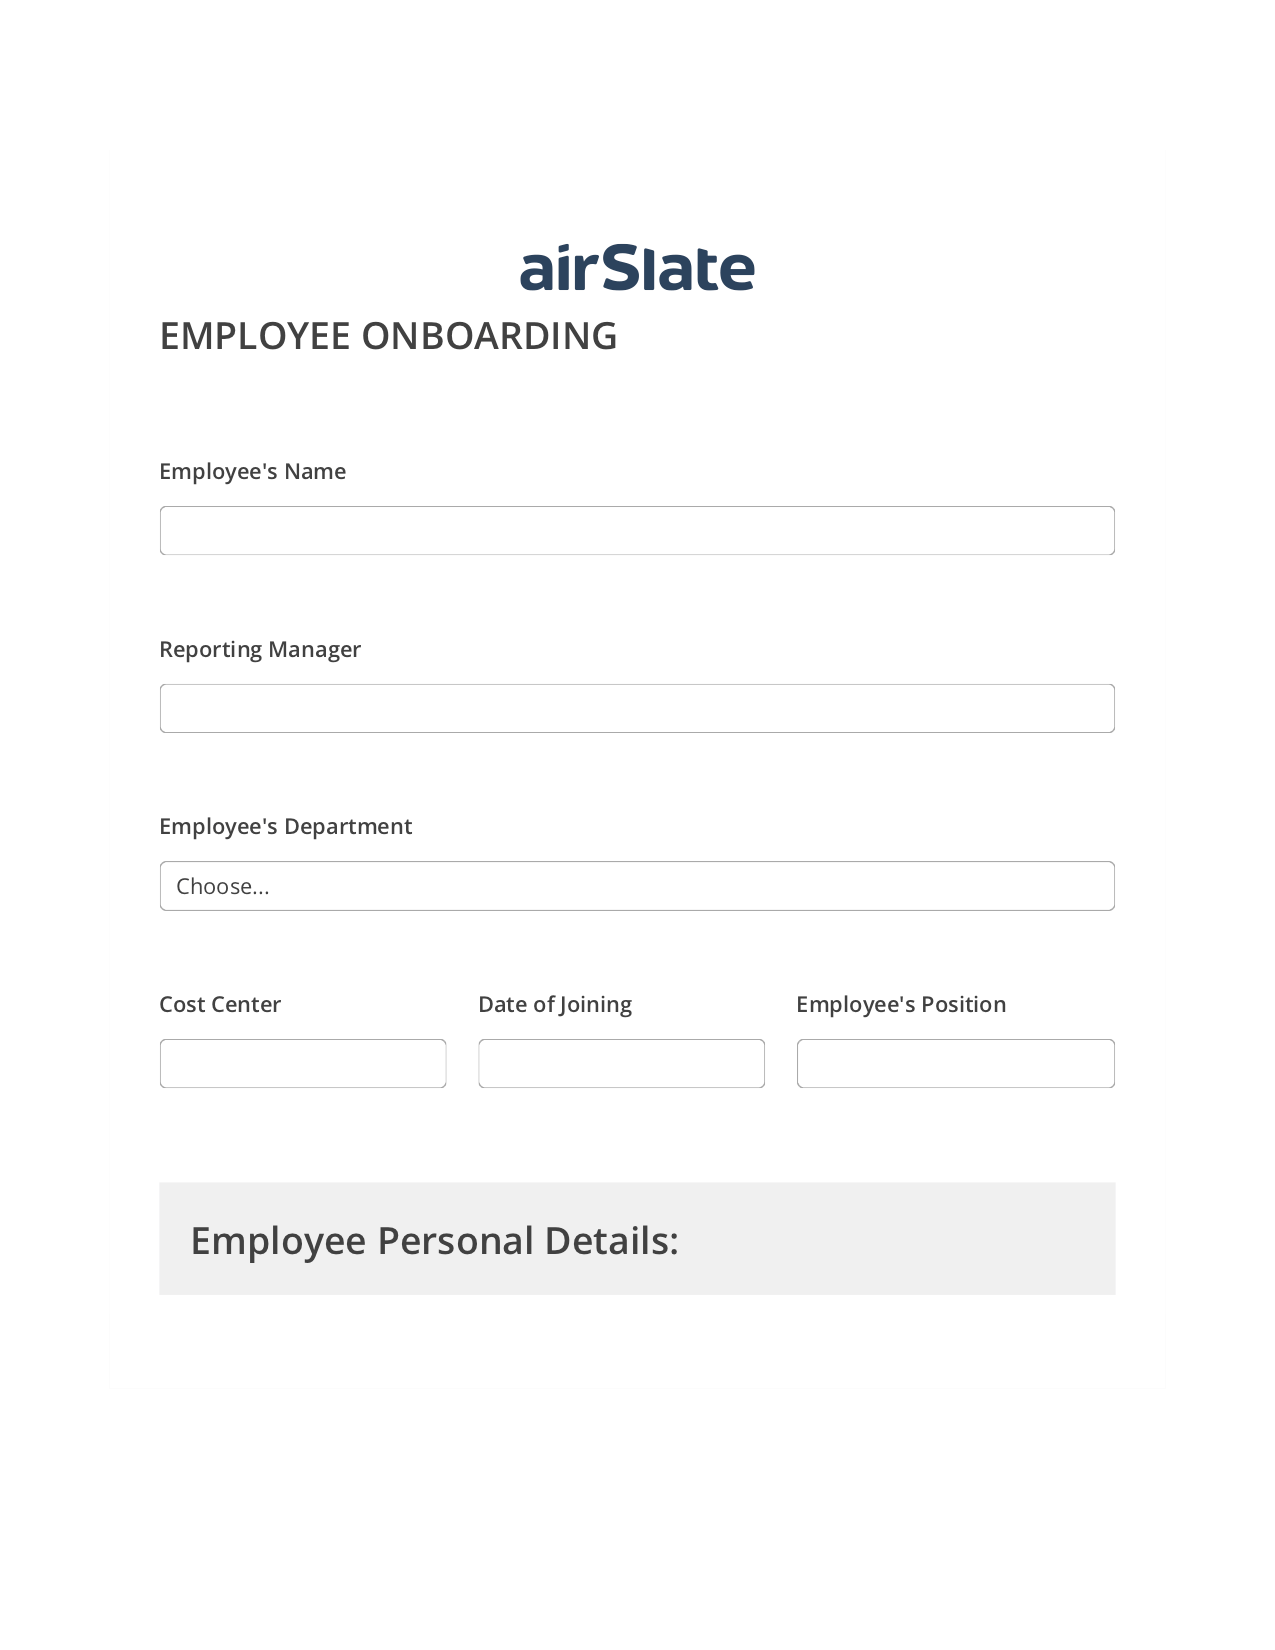 Employee Onboarding Workflow Pre-fill from CSV File Bot, Lock the Slate Bot, Post-finish Document Bot